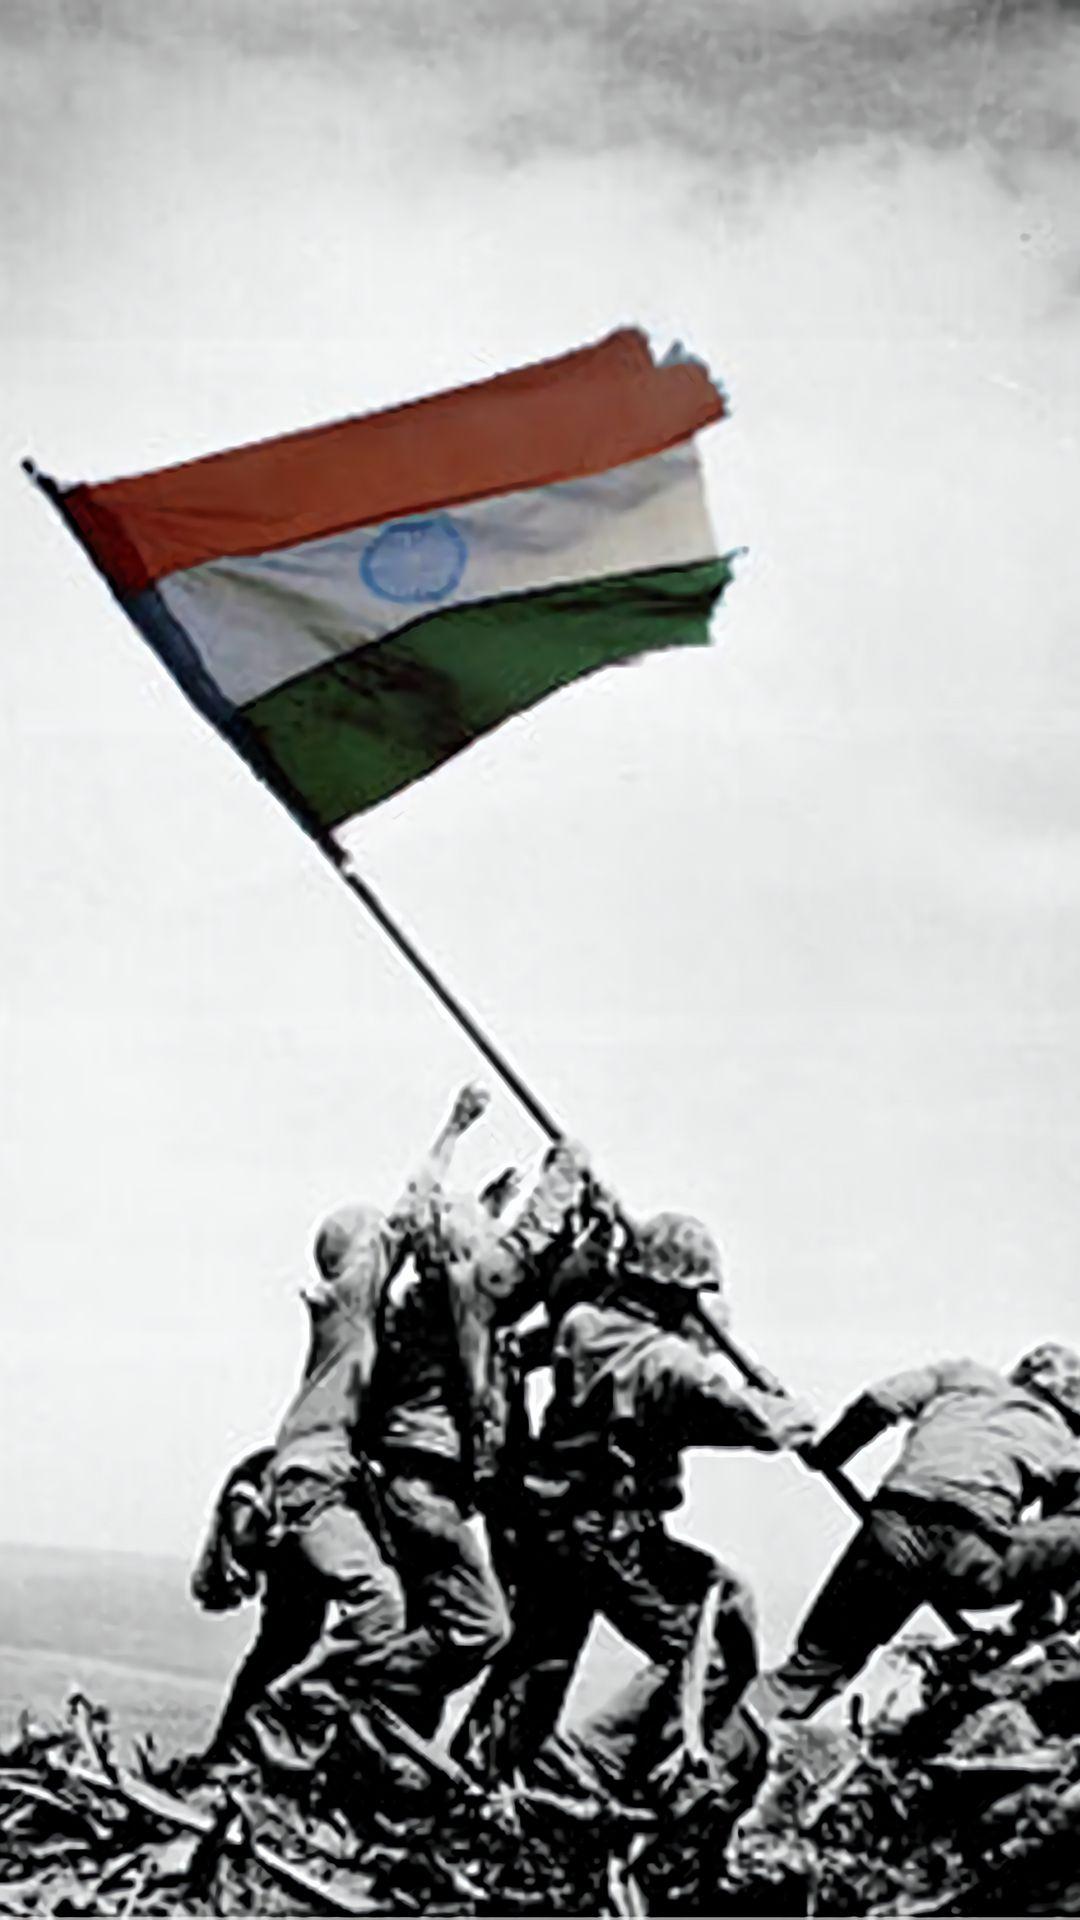 description. Indian army wallpaper, Indian army, Indian army quotes